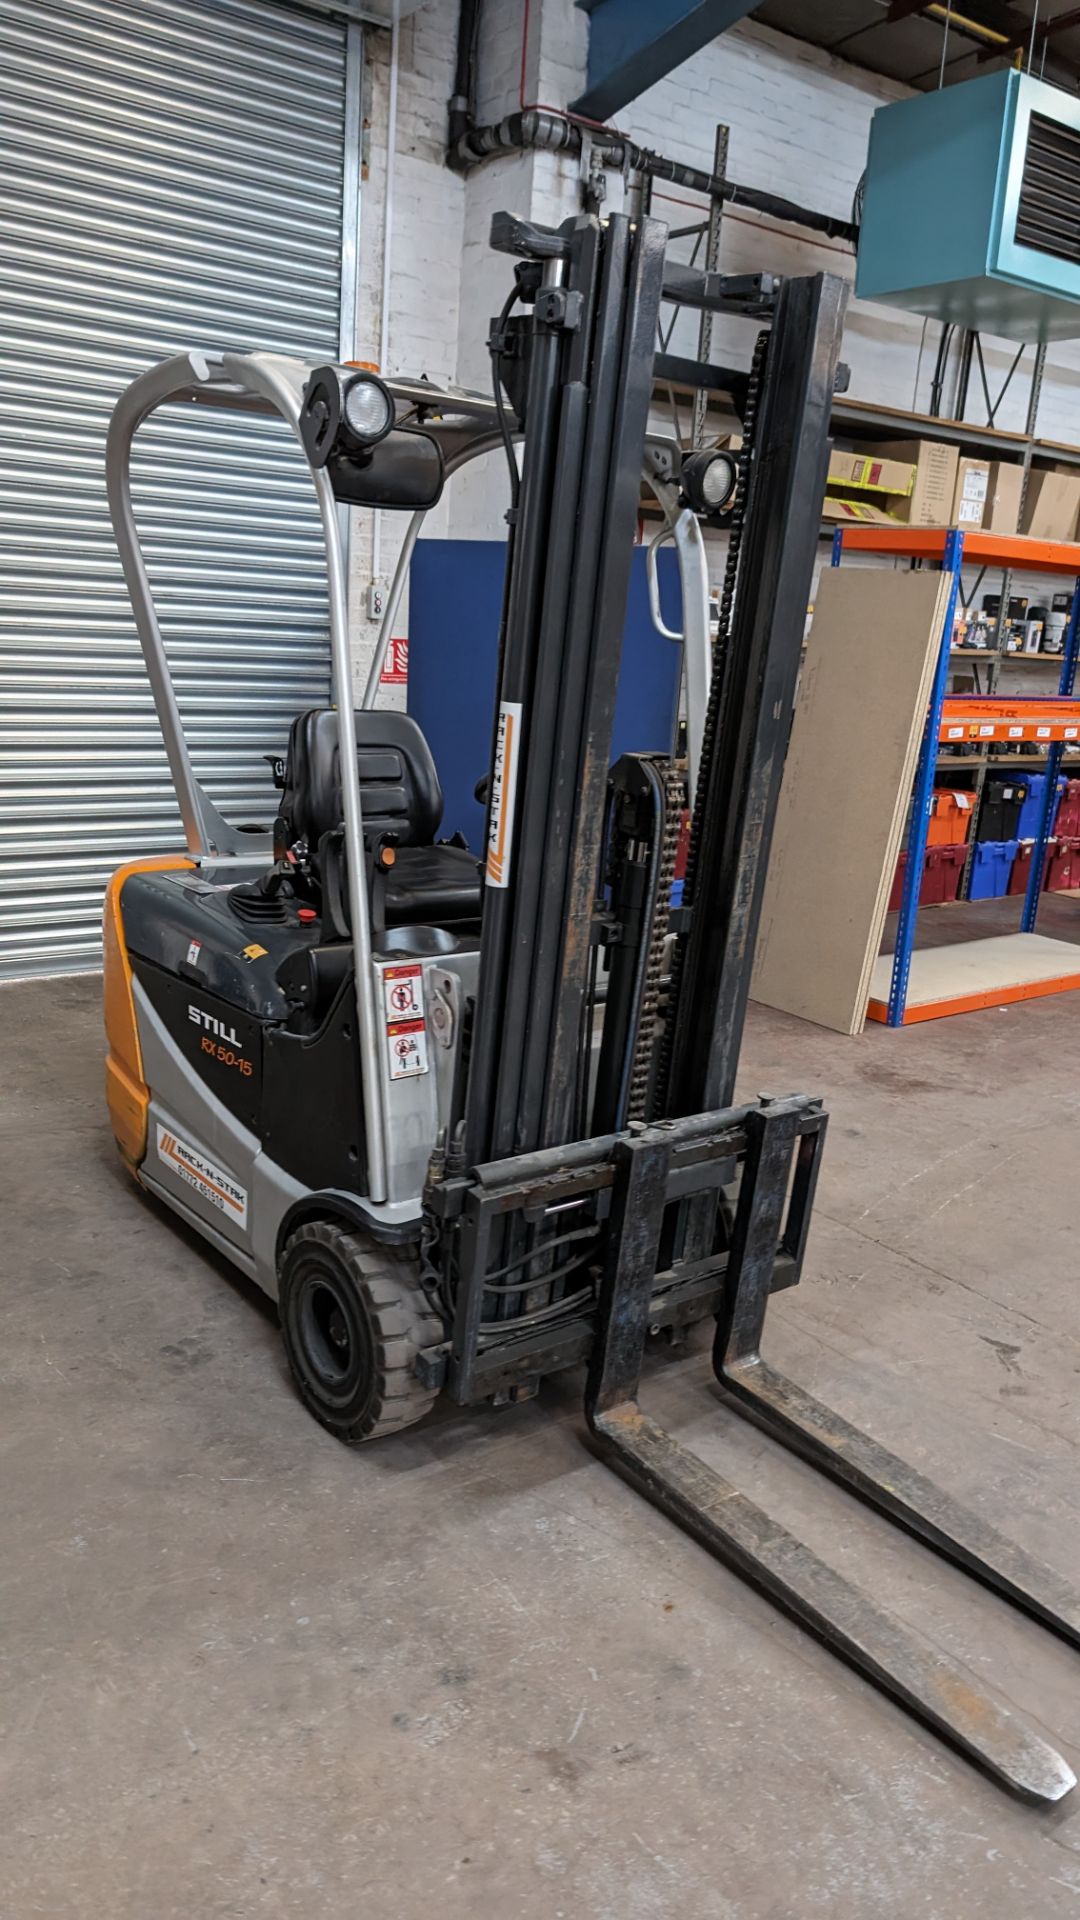 Still model RX-5015 3-wheel electric forklift truck with sideshift, 1.5 tonne capacity, including St - Bild 12 aus 18